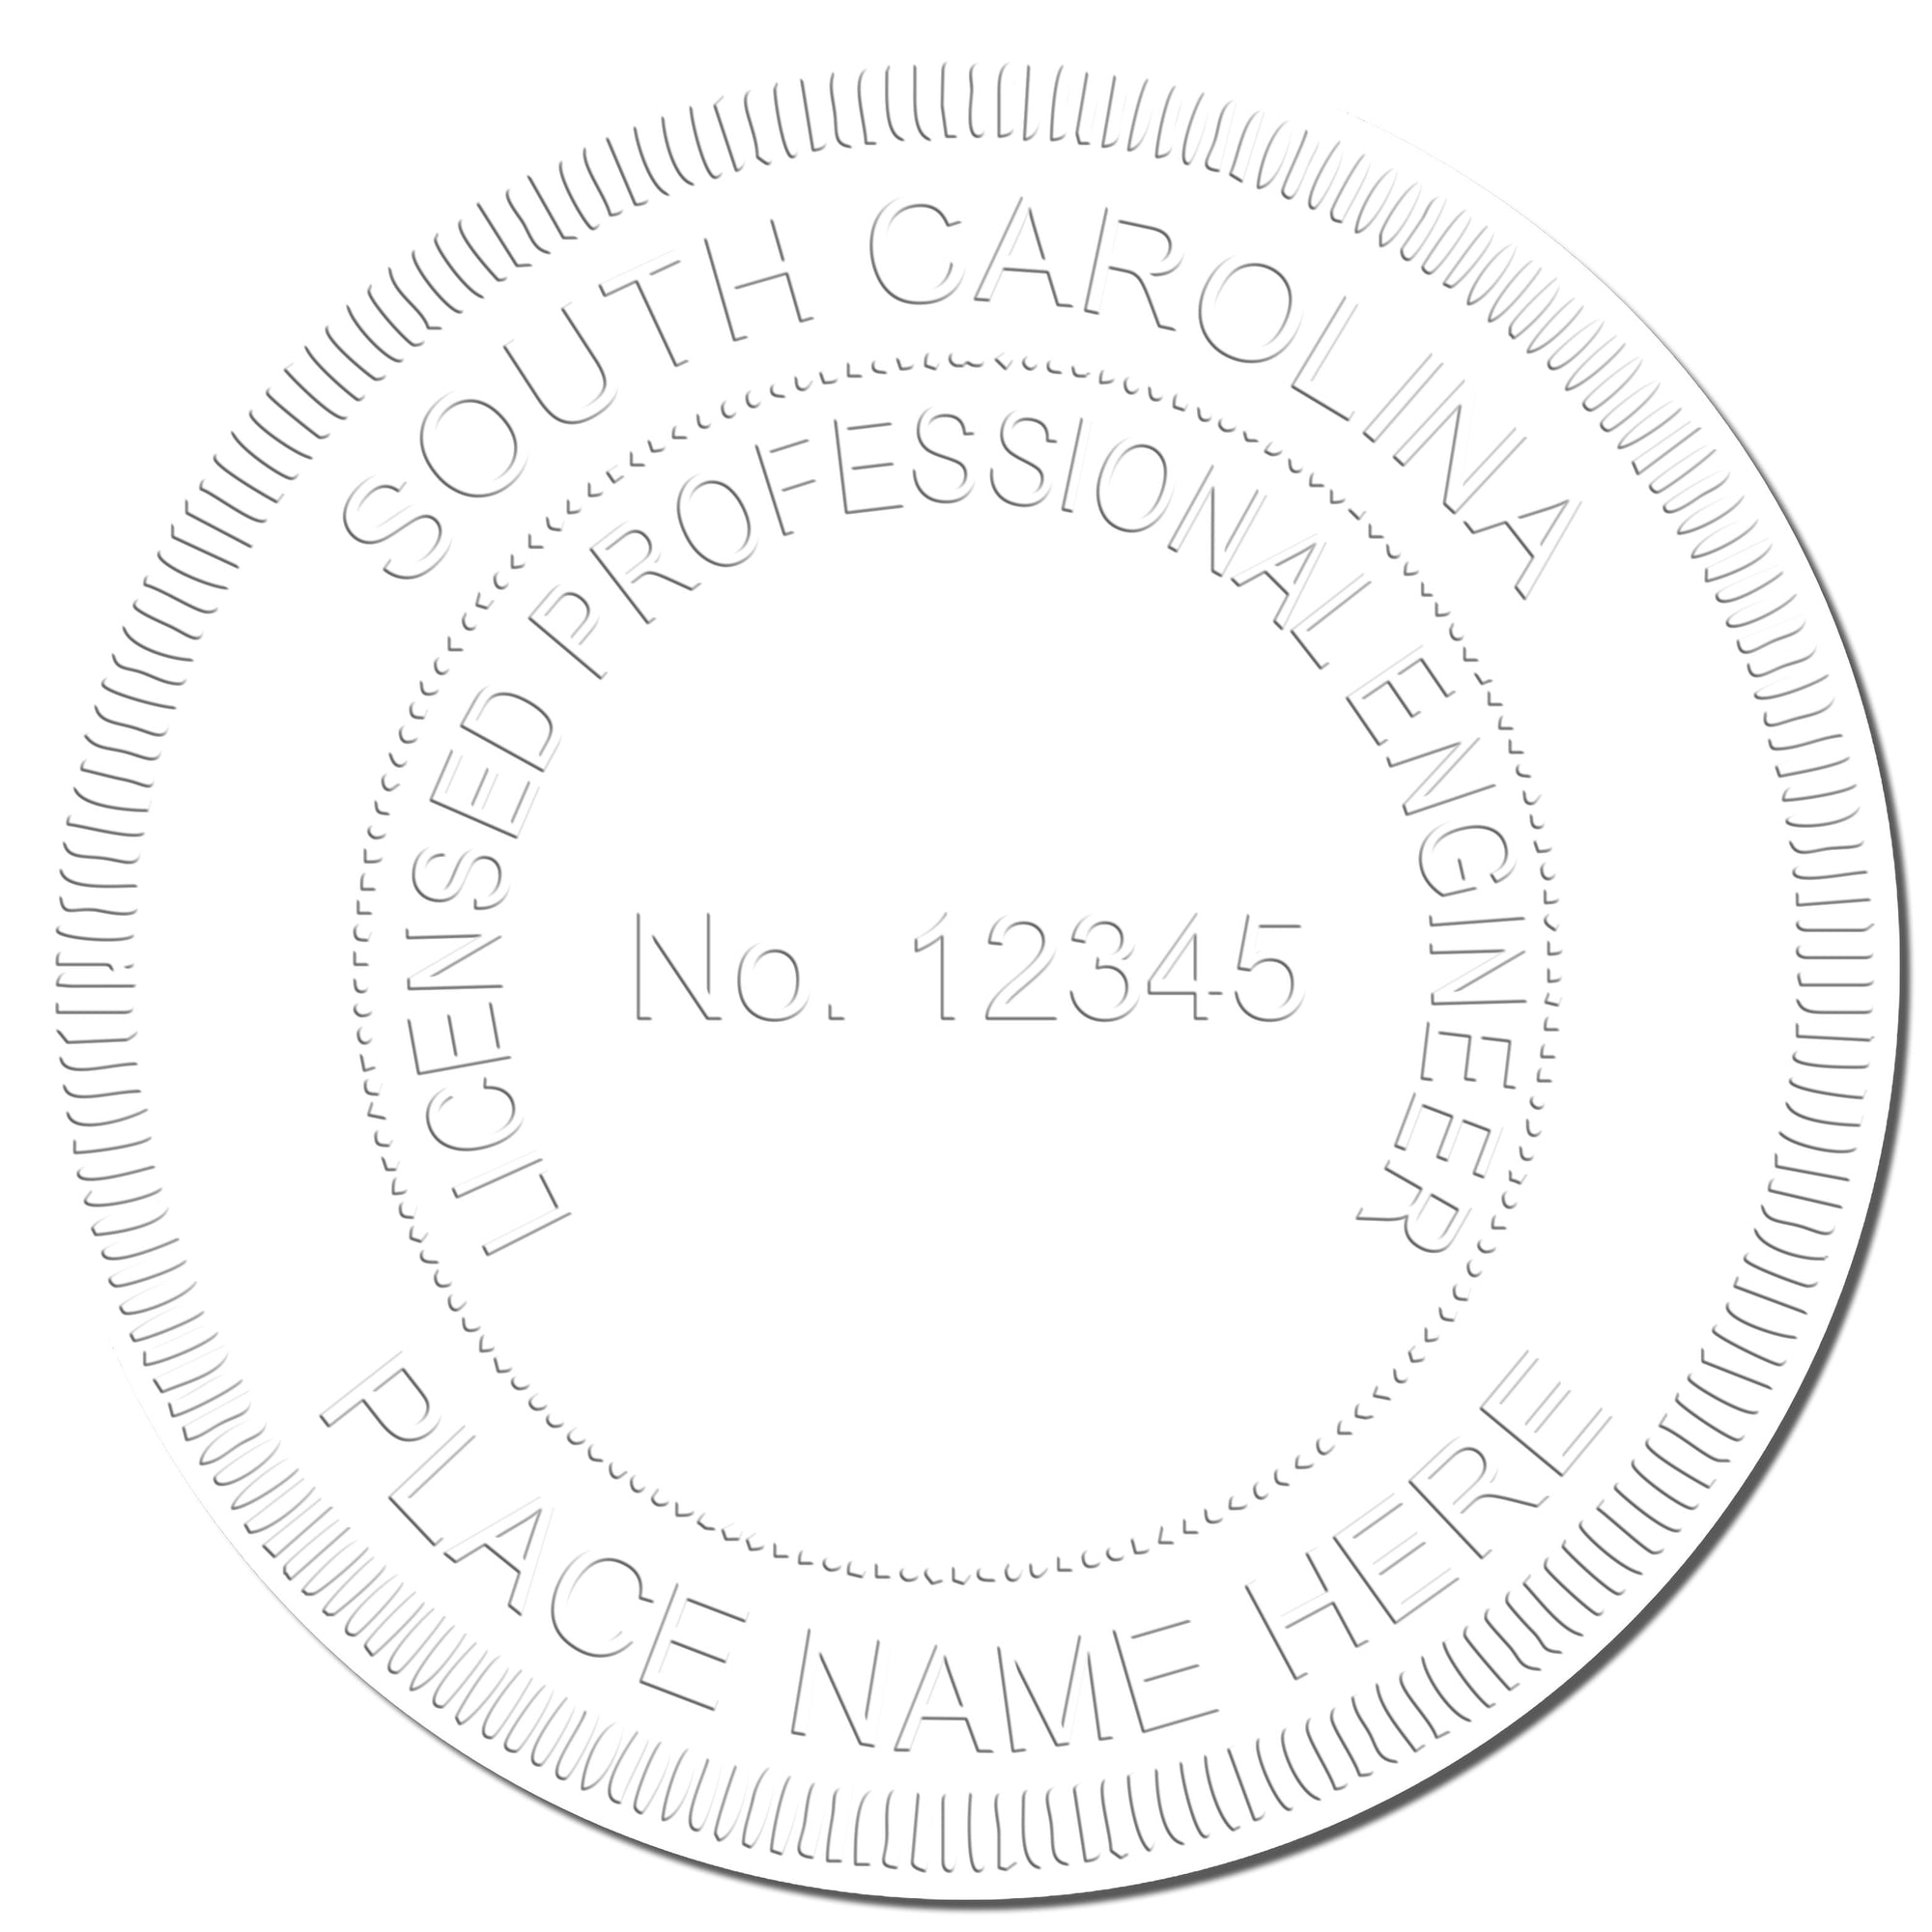 The main image for the South Carolina Engineer Desk Seal depicting a sample of the imprint and electronic files